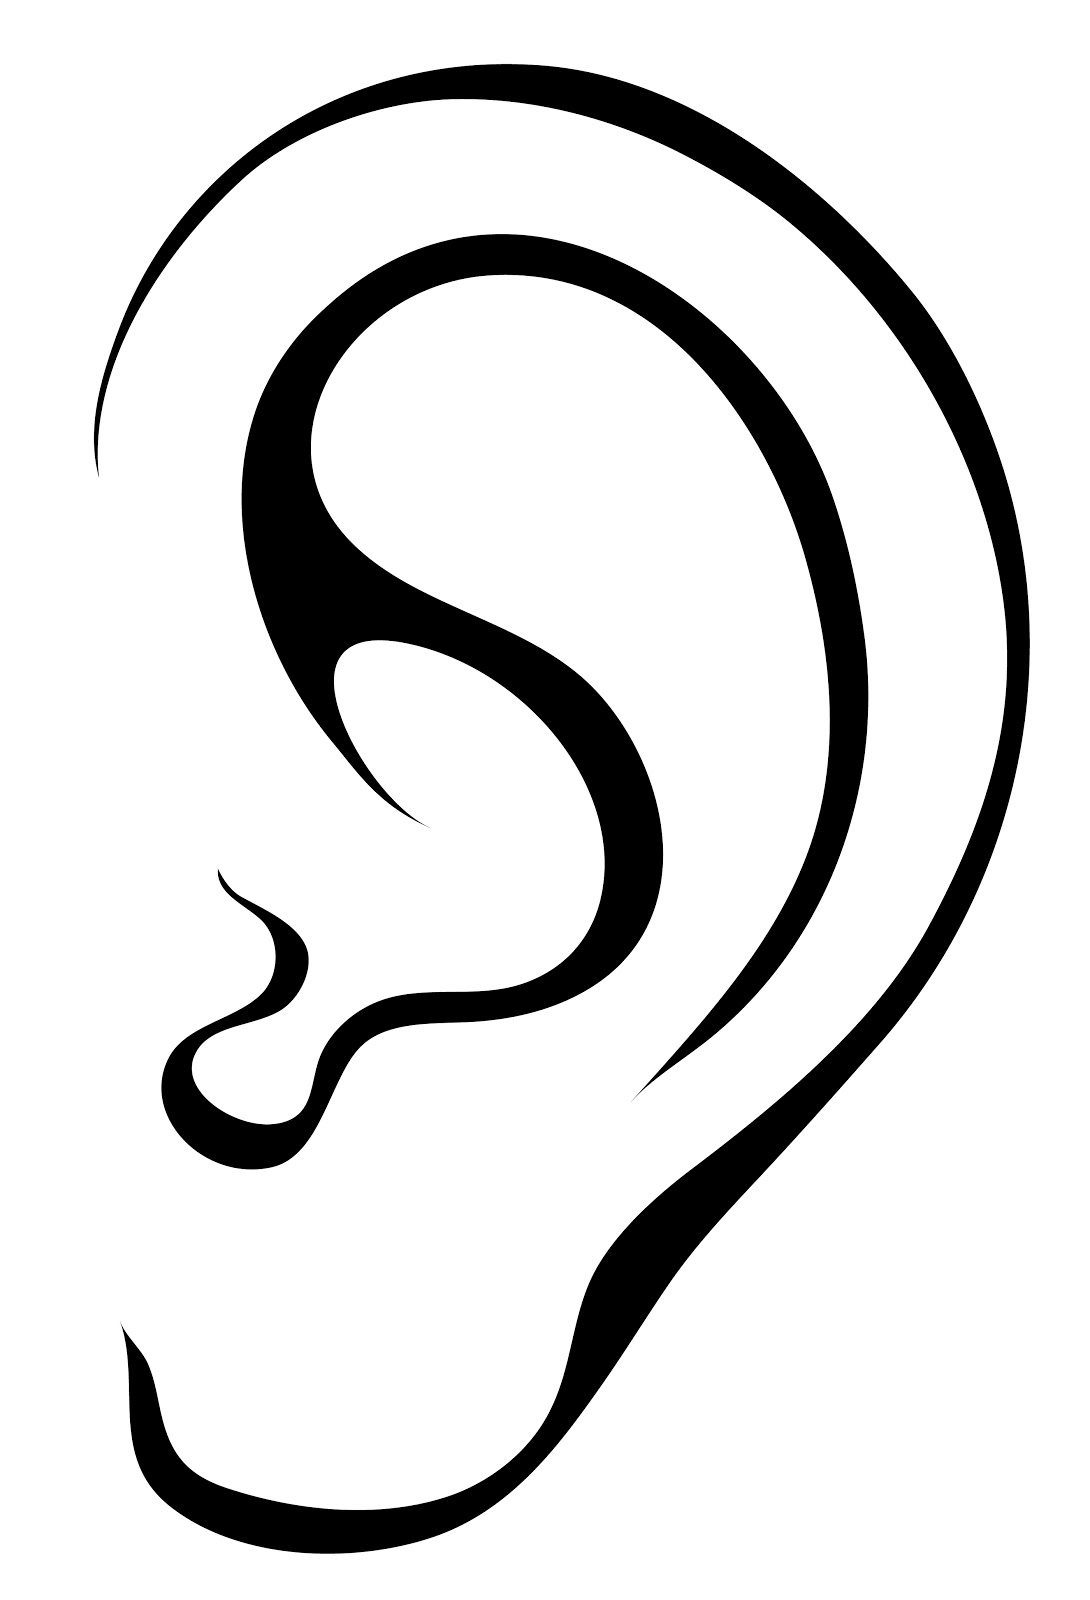 Listening Ear Images - Free Clipart Images